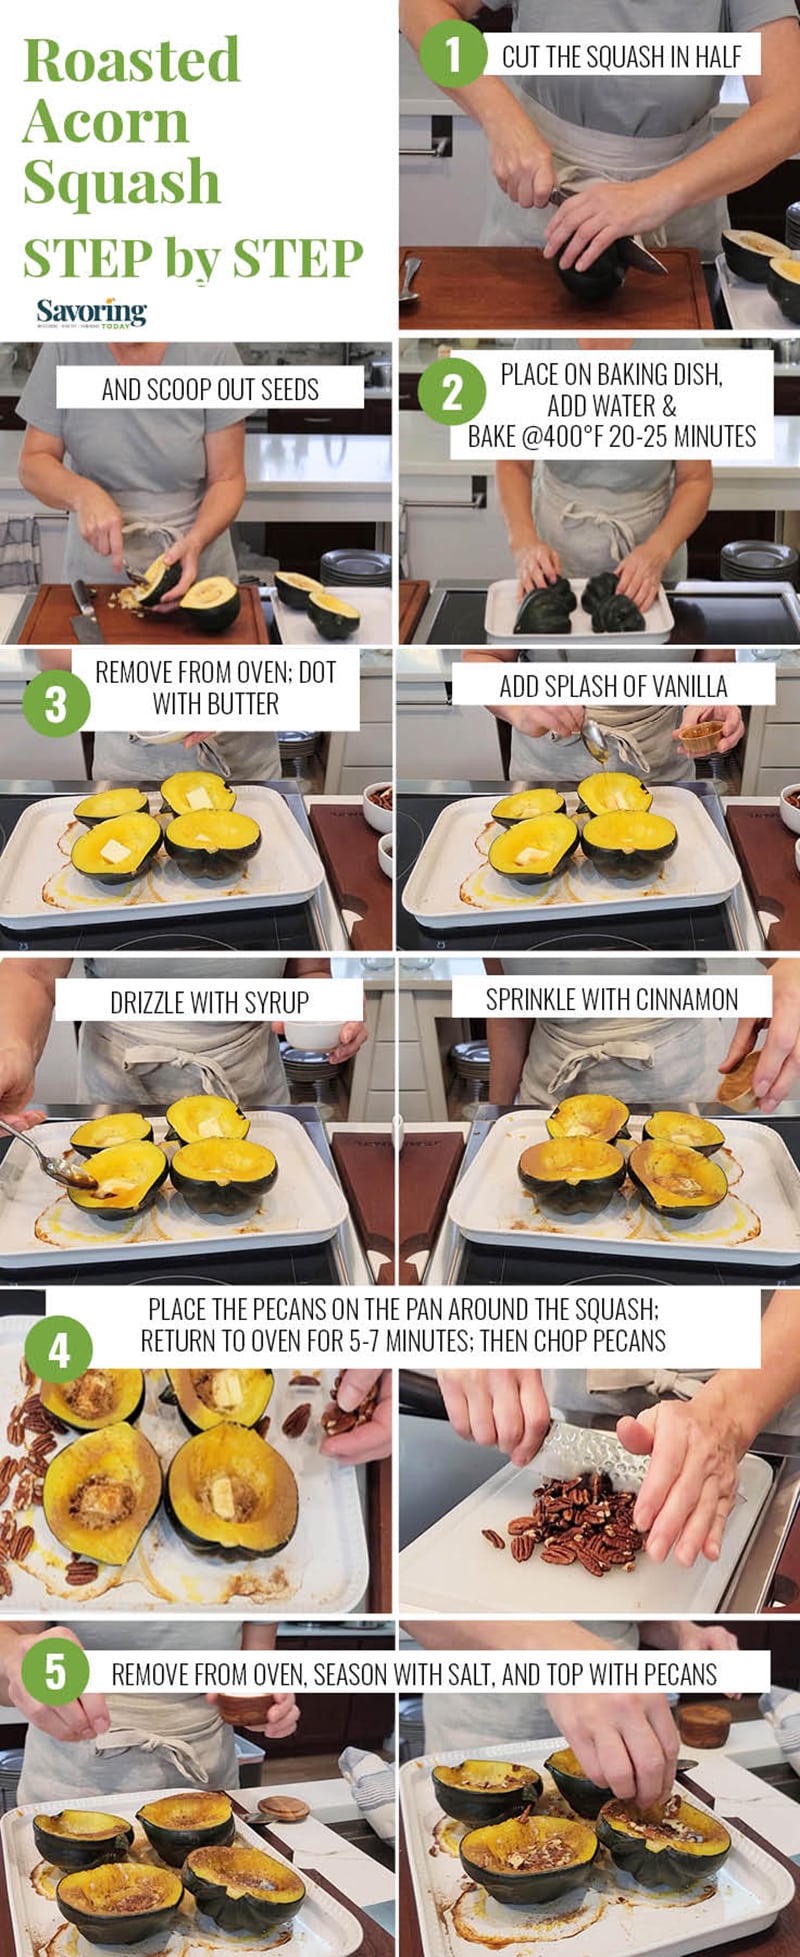 Step by step photo collage for cutting, roasting, and serving acorn squash.